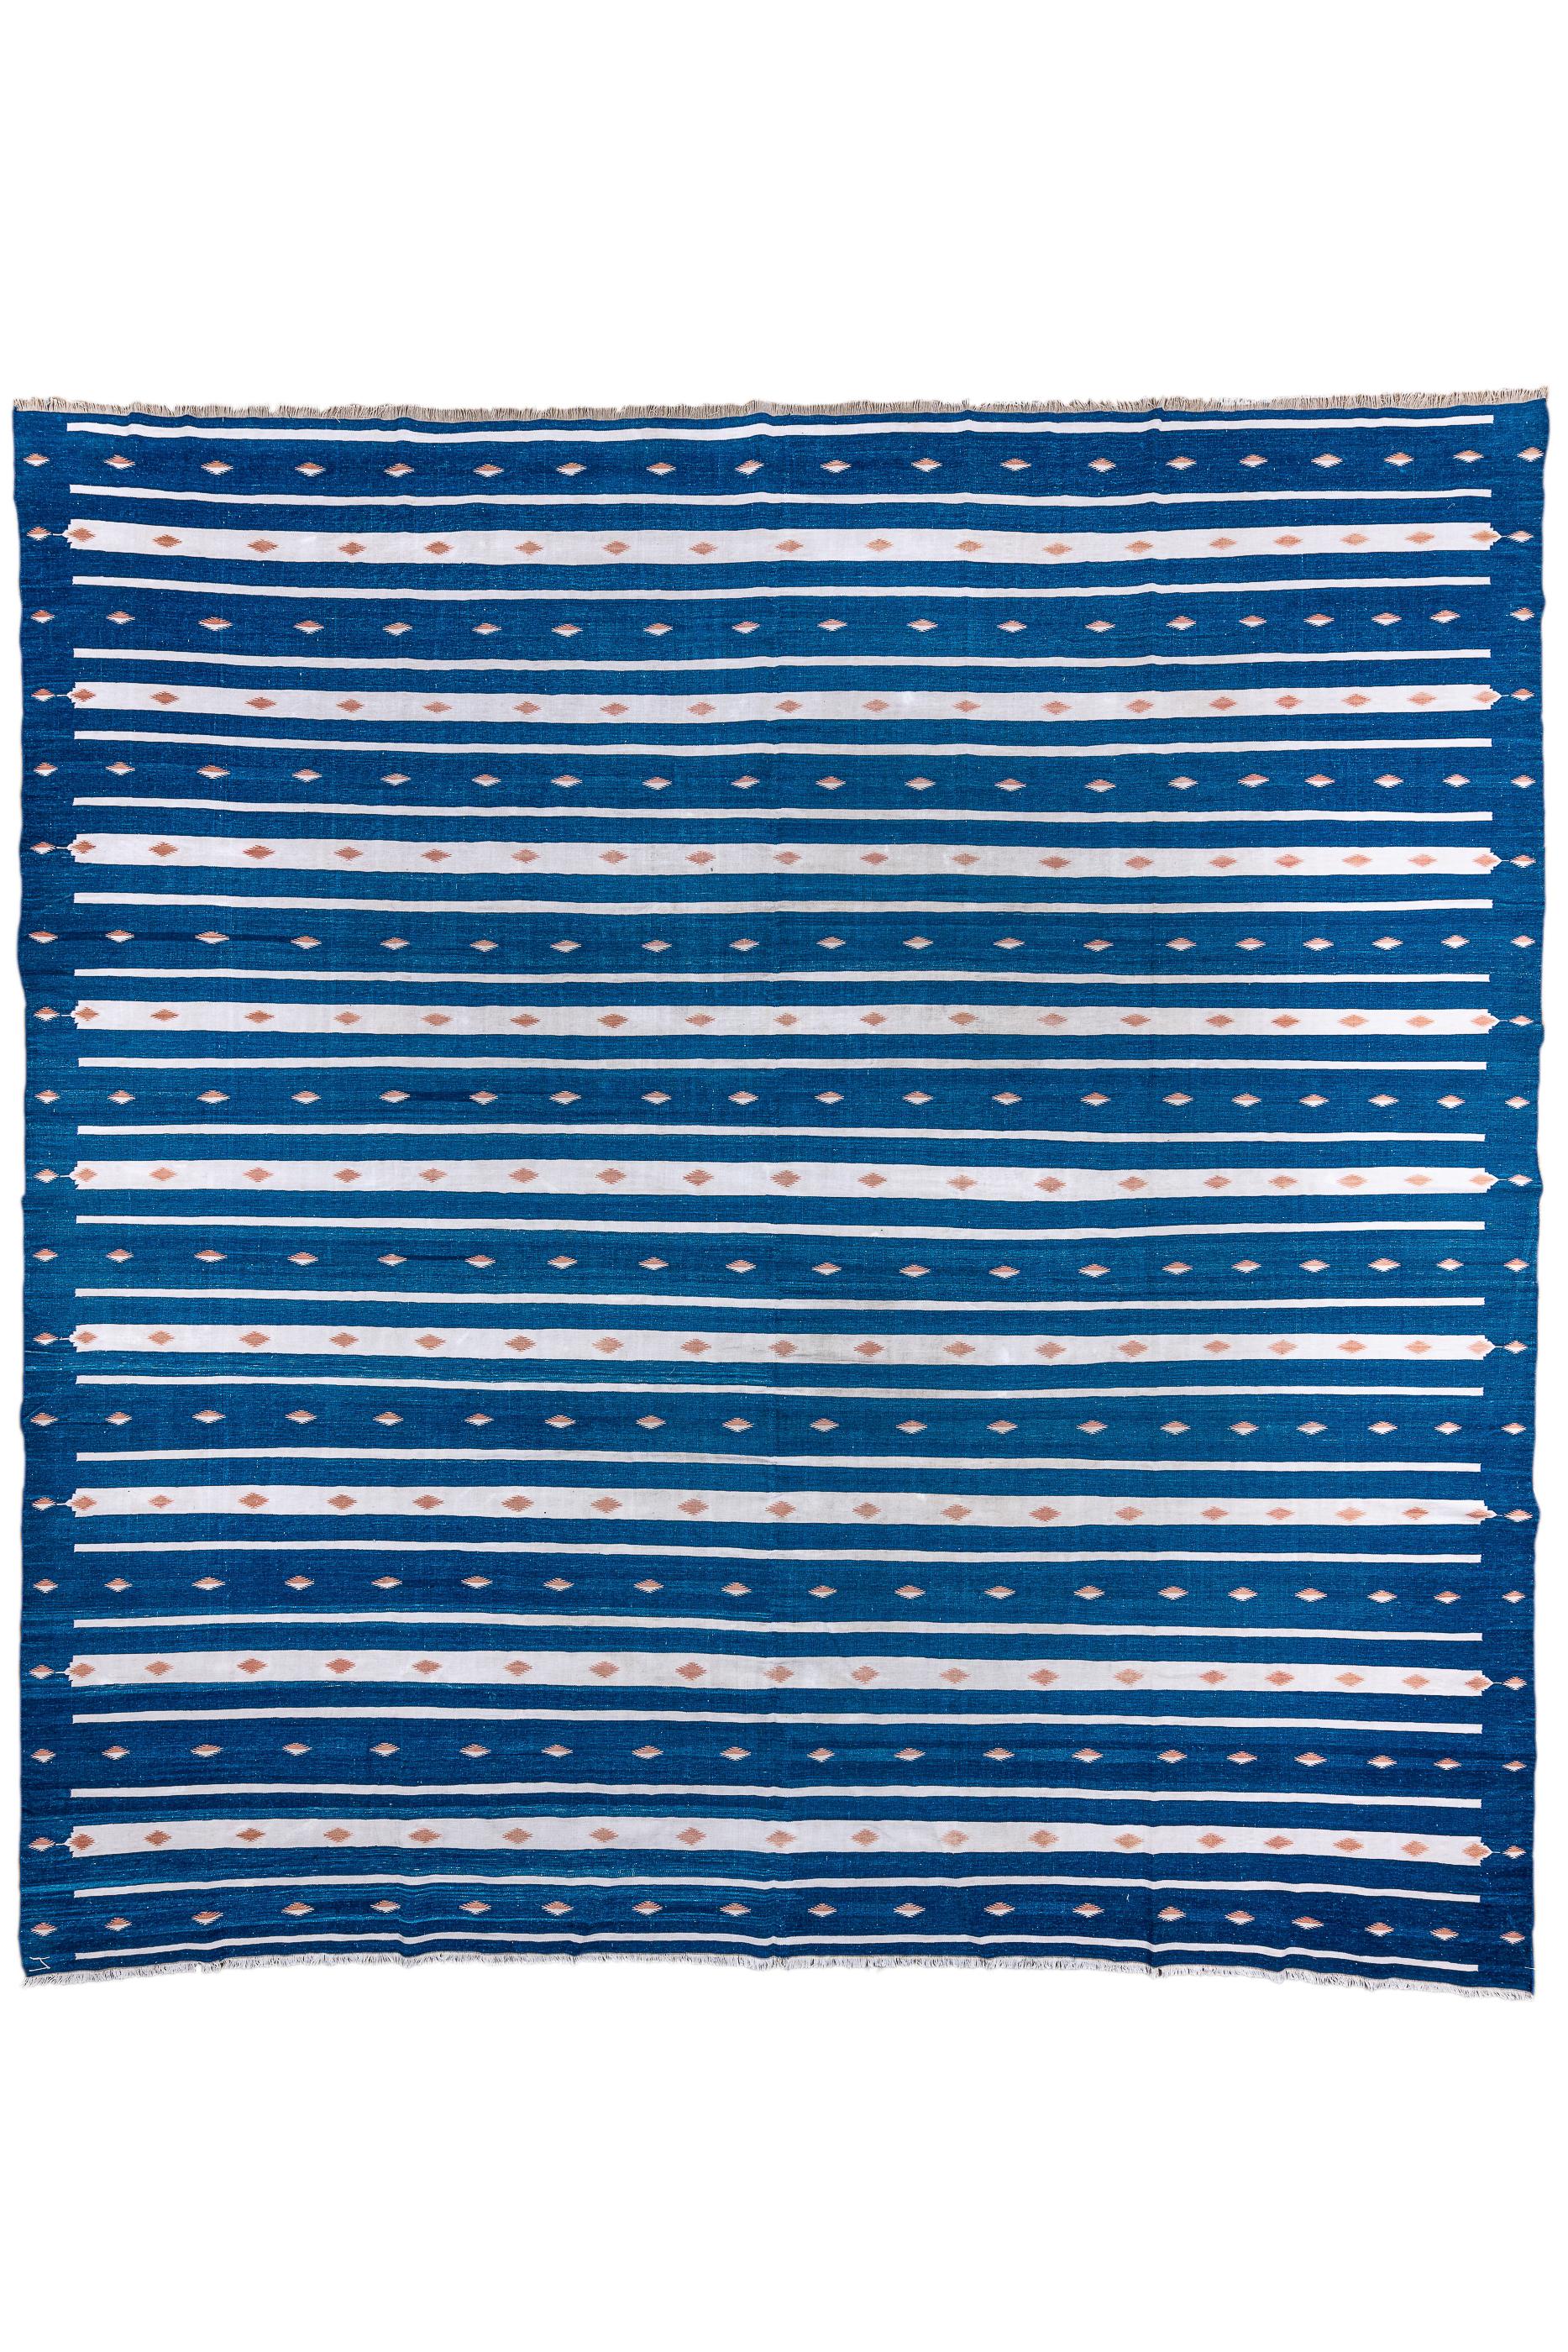 Classical Blue & White striped Indian Hand-Woven Dhurrie Rug. Antique all cotton flatweave carpet in excellent condition. 

Rug Measures
11x11'2.